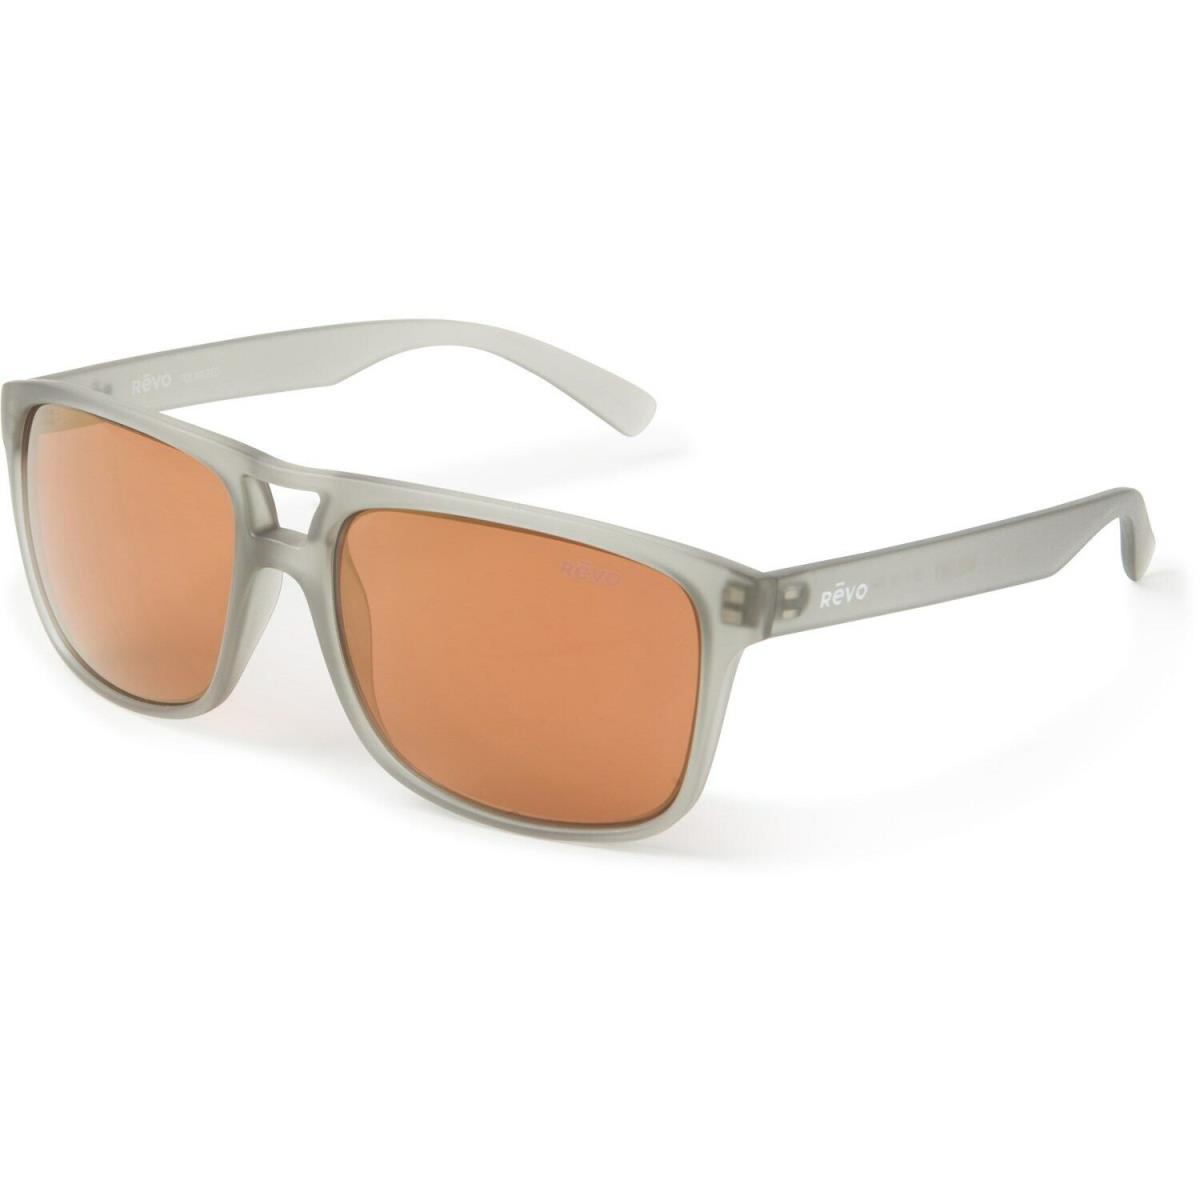 Revo Holsby Polarized Sunglasses - RE 1019 00OR/MatteGreyCrystal/OpenRoad